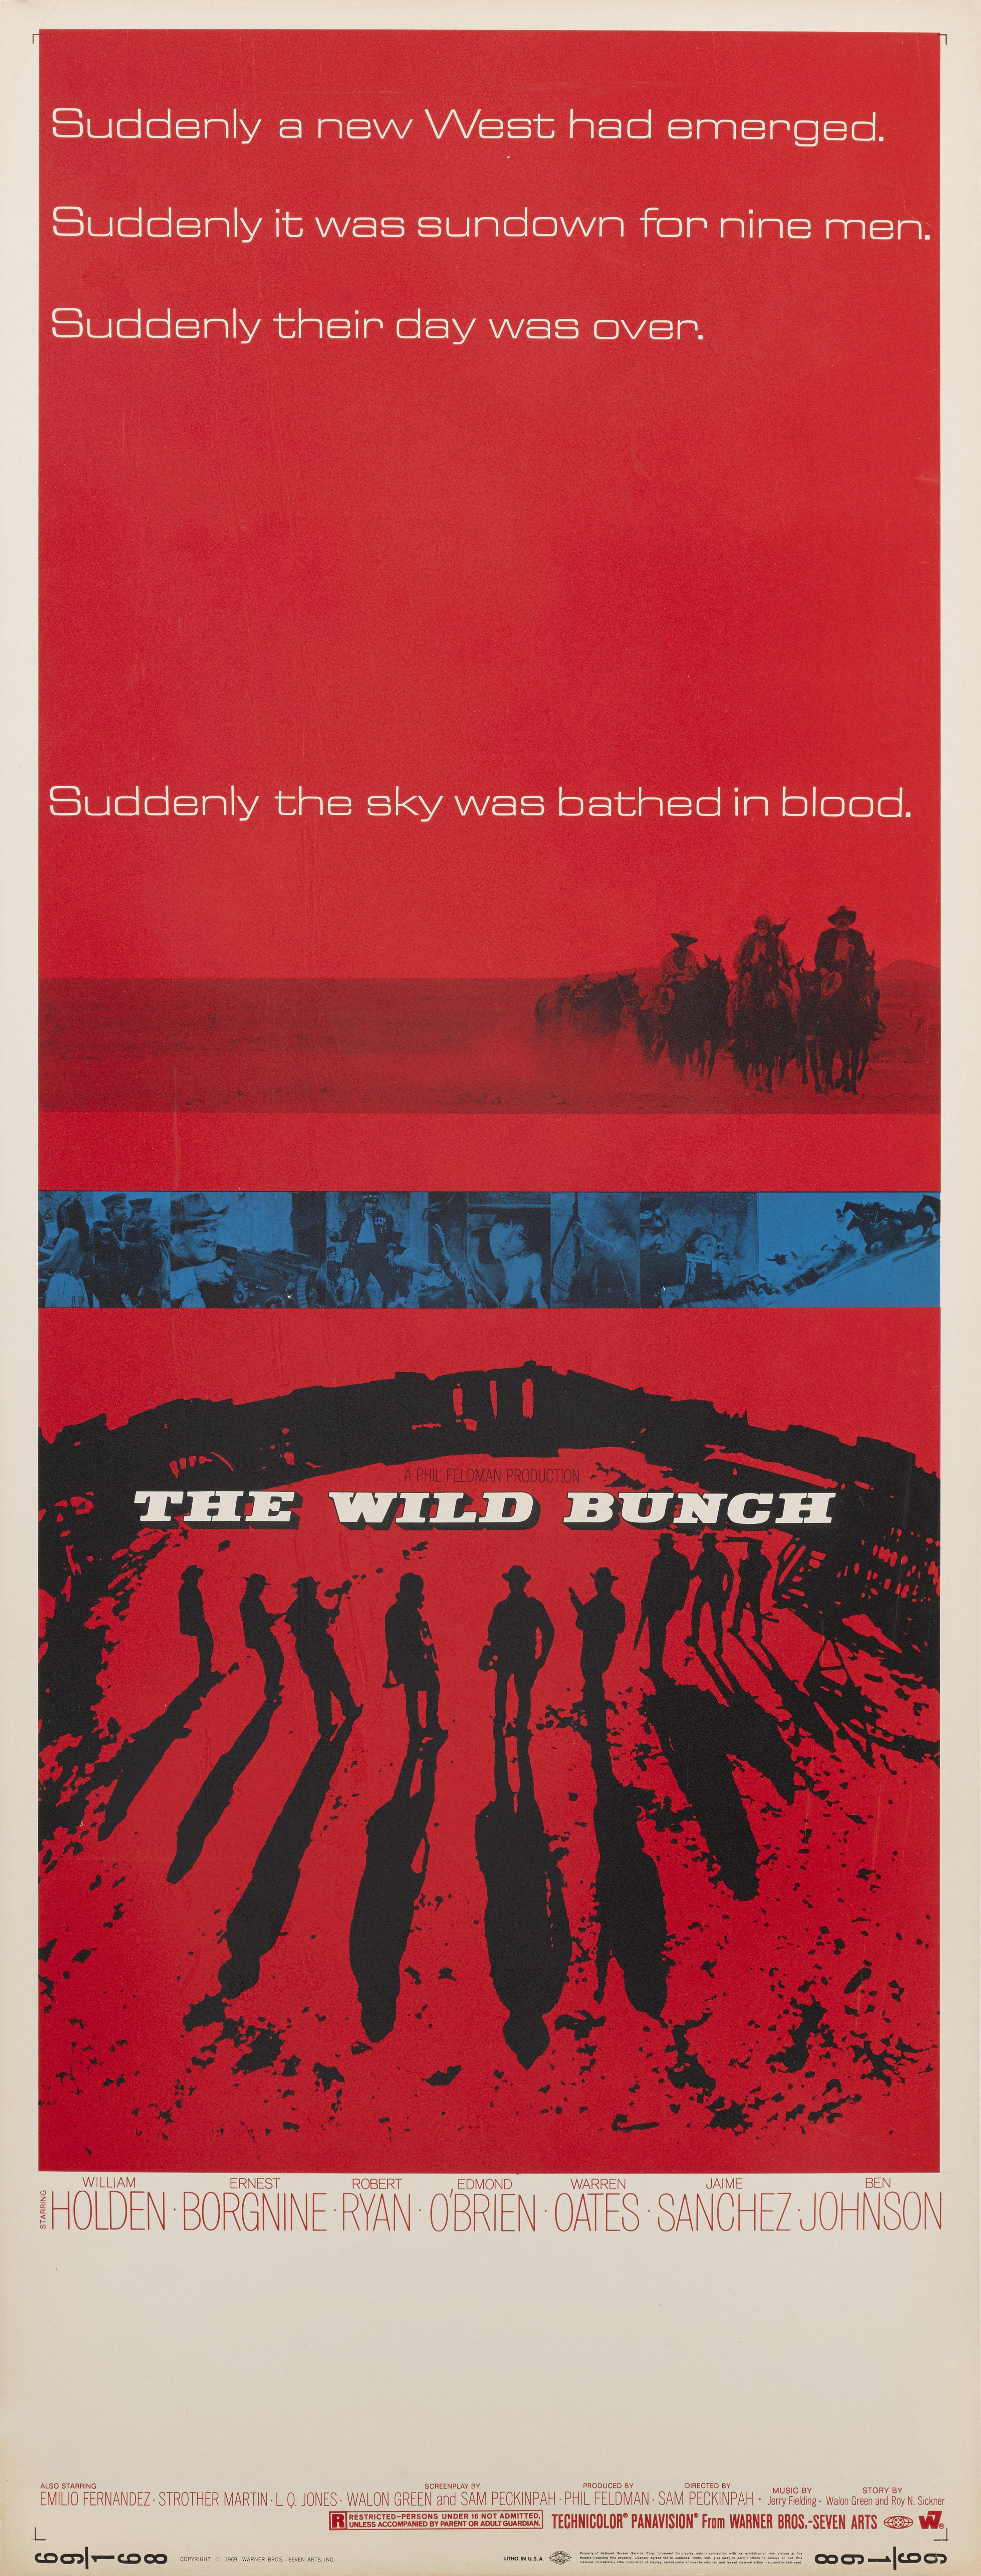 Original American film poster for Sam Peckinpah's 1969 western The Wild Bunch.
This is one of the best looking American posters for the film with great tag lines.
This film starred William Holden, Ernest Borgnine, Robert Ryan, Warren Oates, Edmond